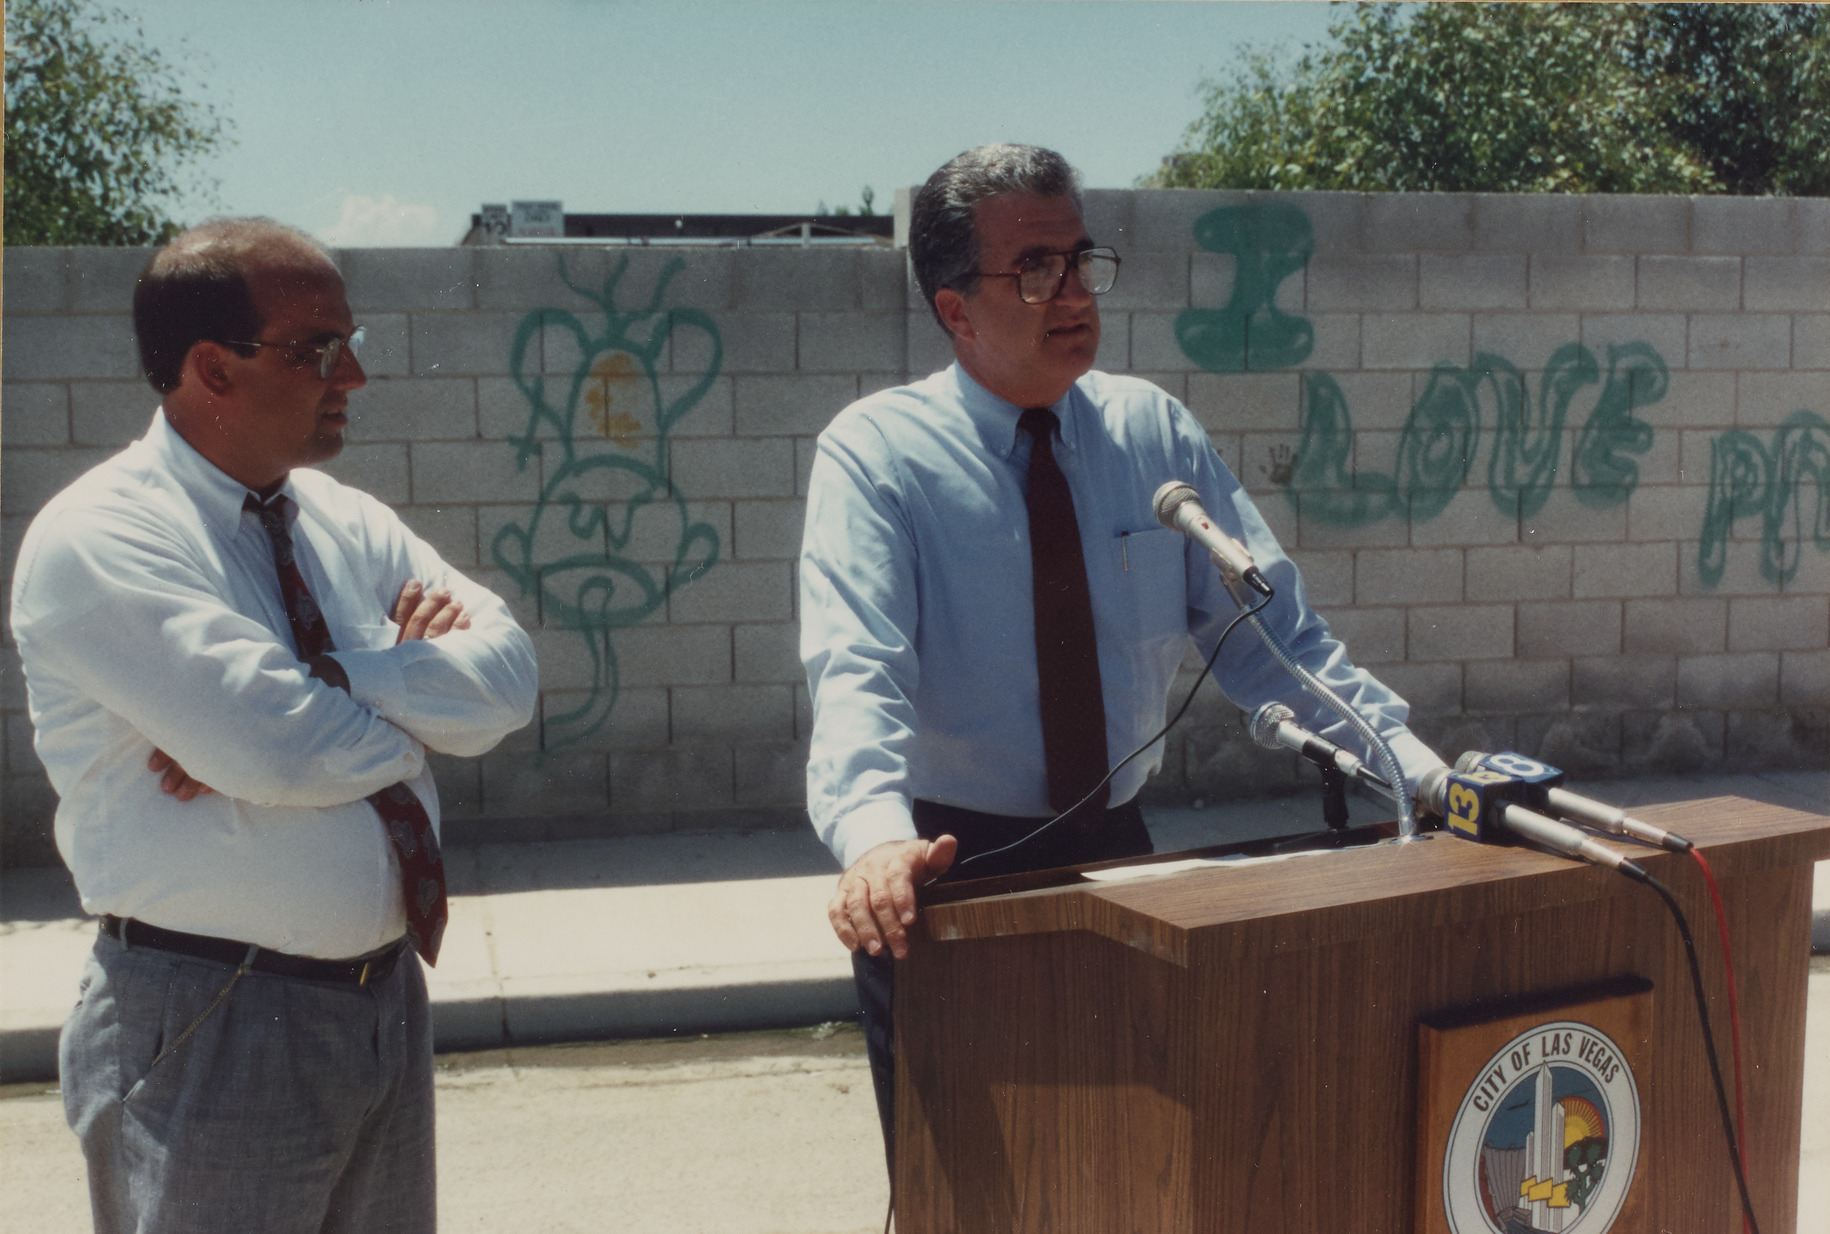 Photograph of Ron Lurie at event for graffiti removal